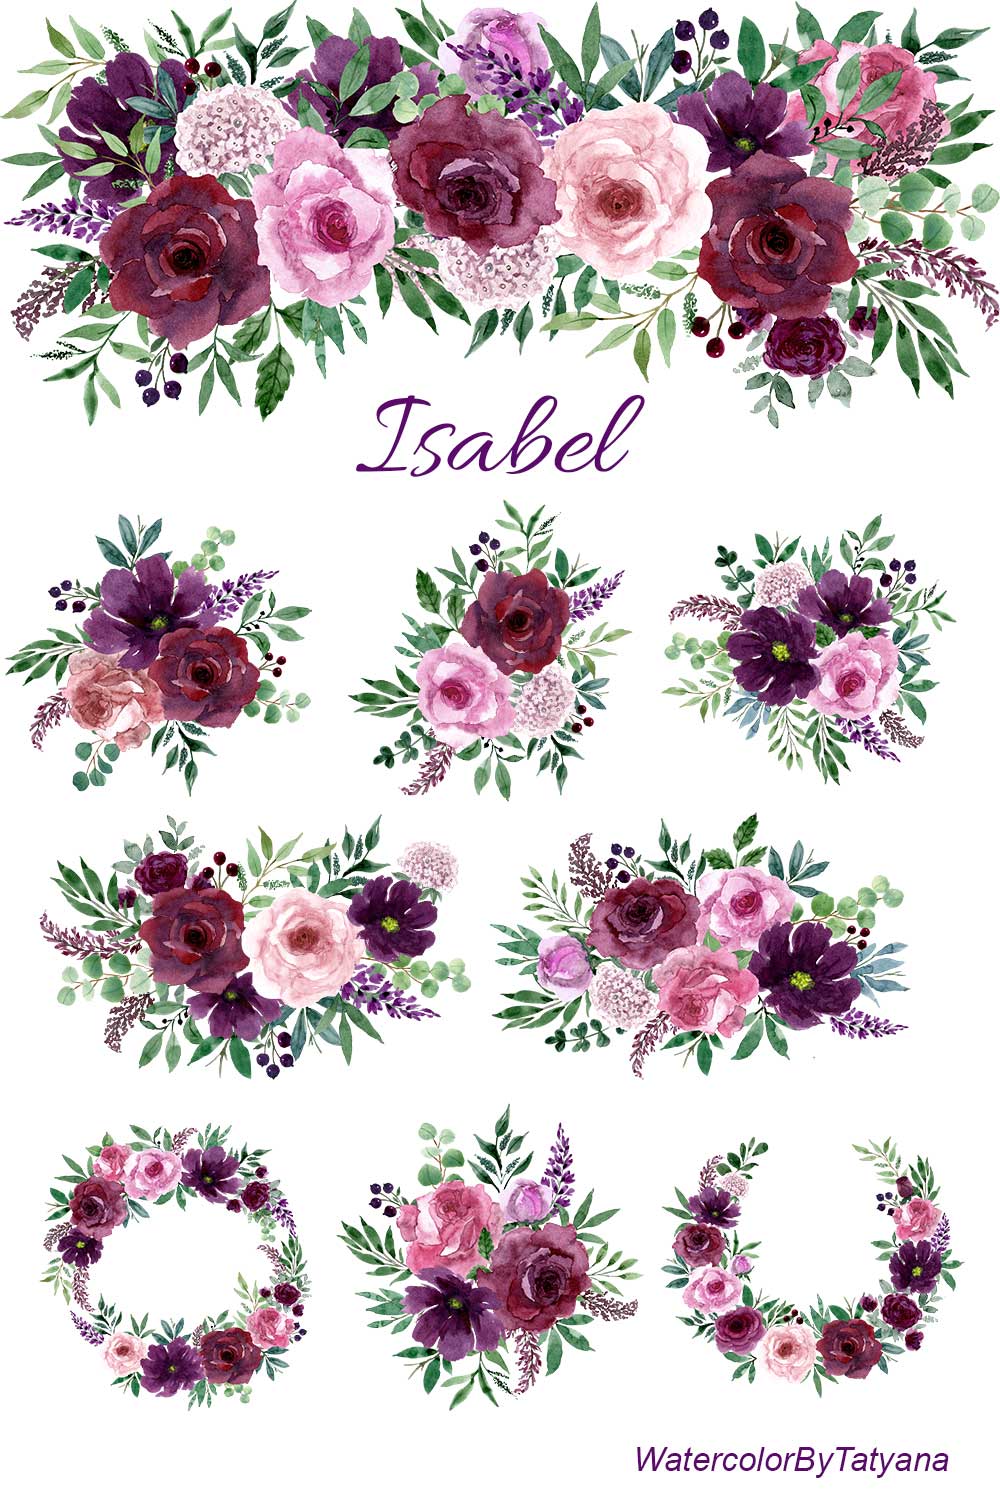 Burgundy, Purple and Pink Watercolor Flowers Clipart Set pinterest image.